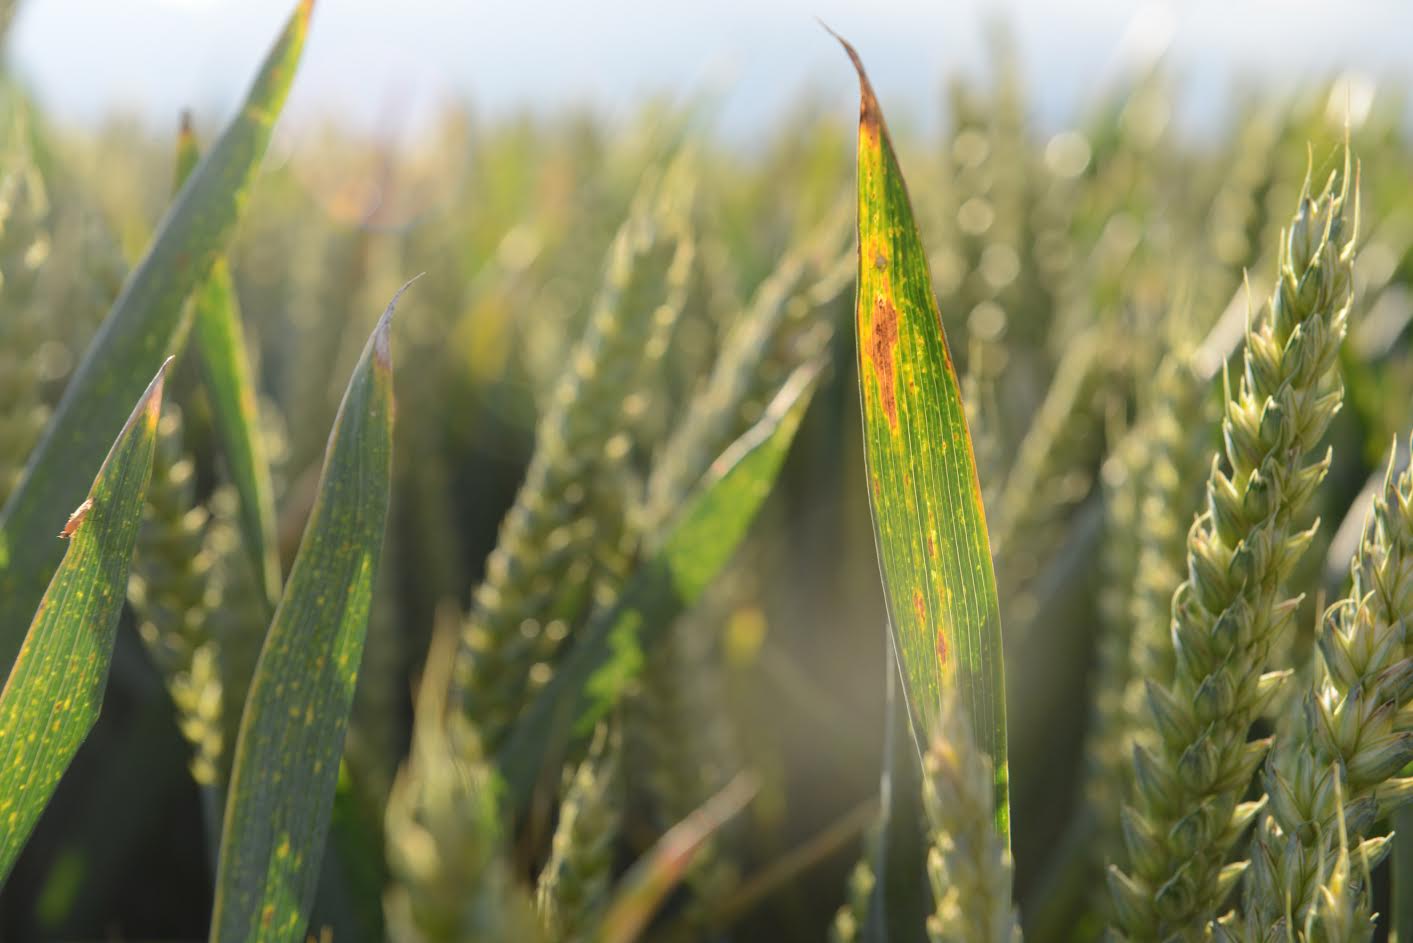 BYDV causes estimated average yield losses of 8 per cent in wheat and 2 per cent in barley